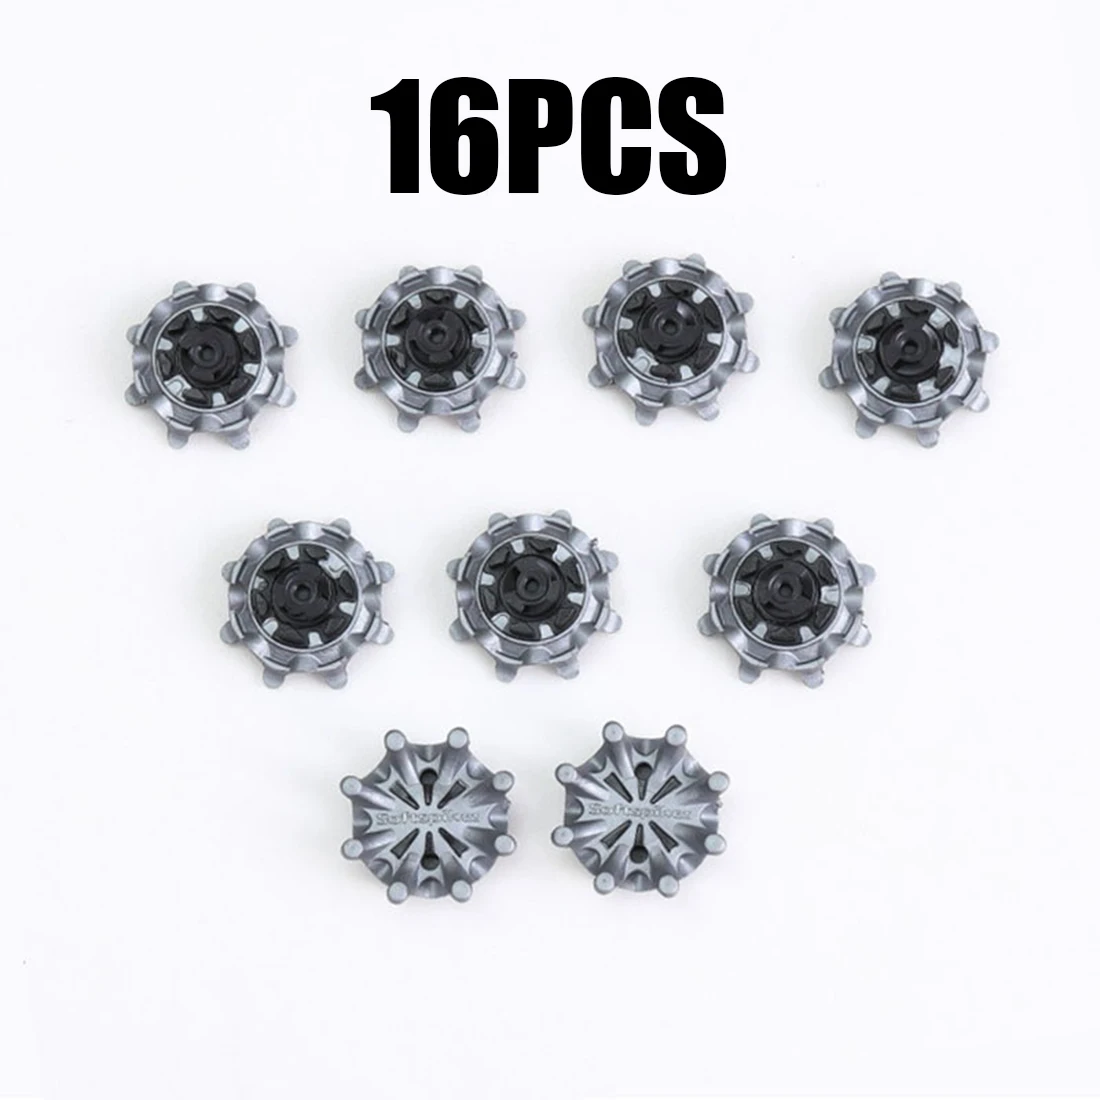 

16Pcs Spike Golf Shoe Replacement Champ Fast Screw Durable High quality Reactive rubber good grip comfortable model